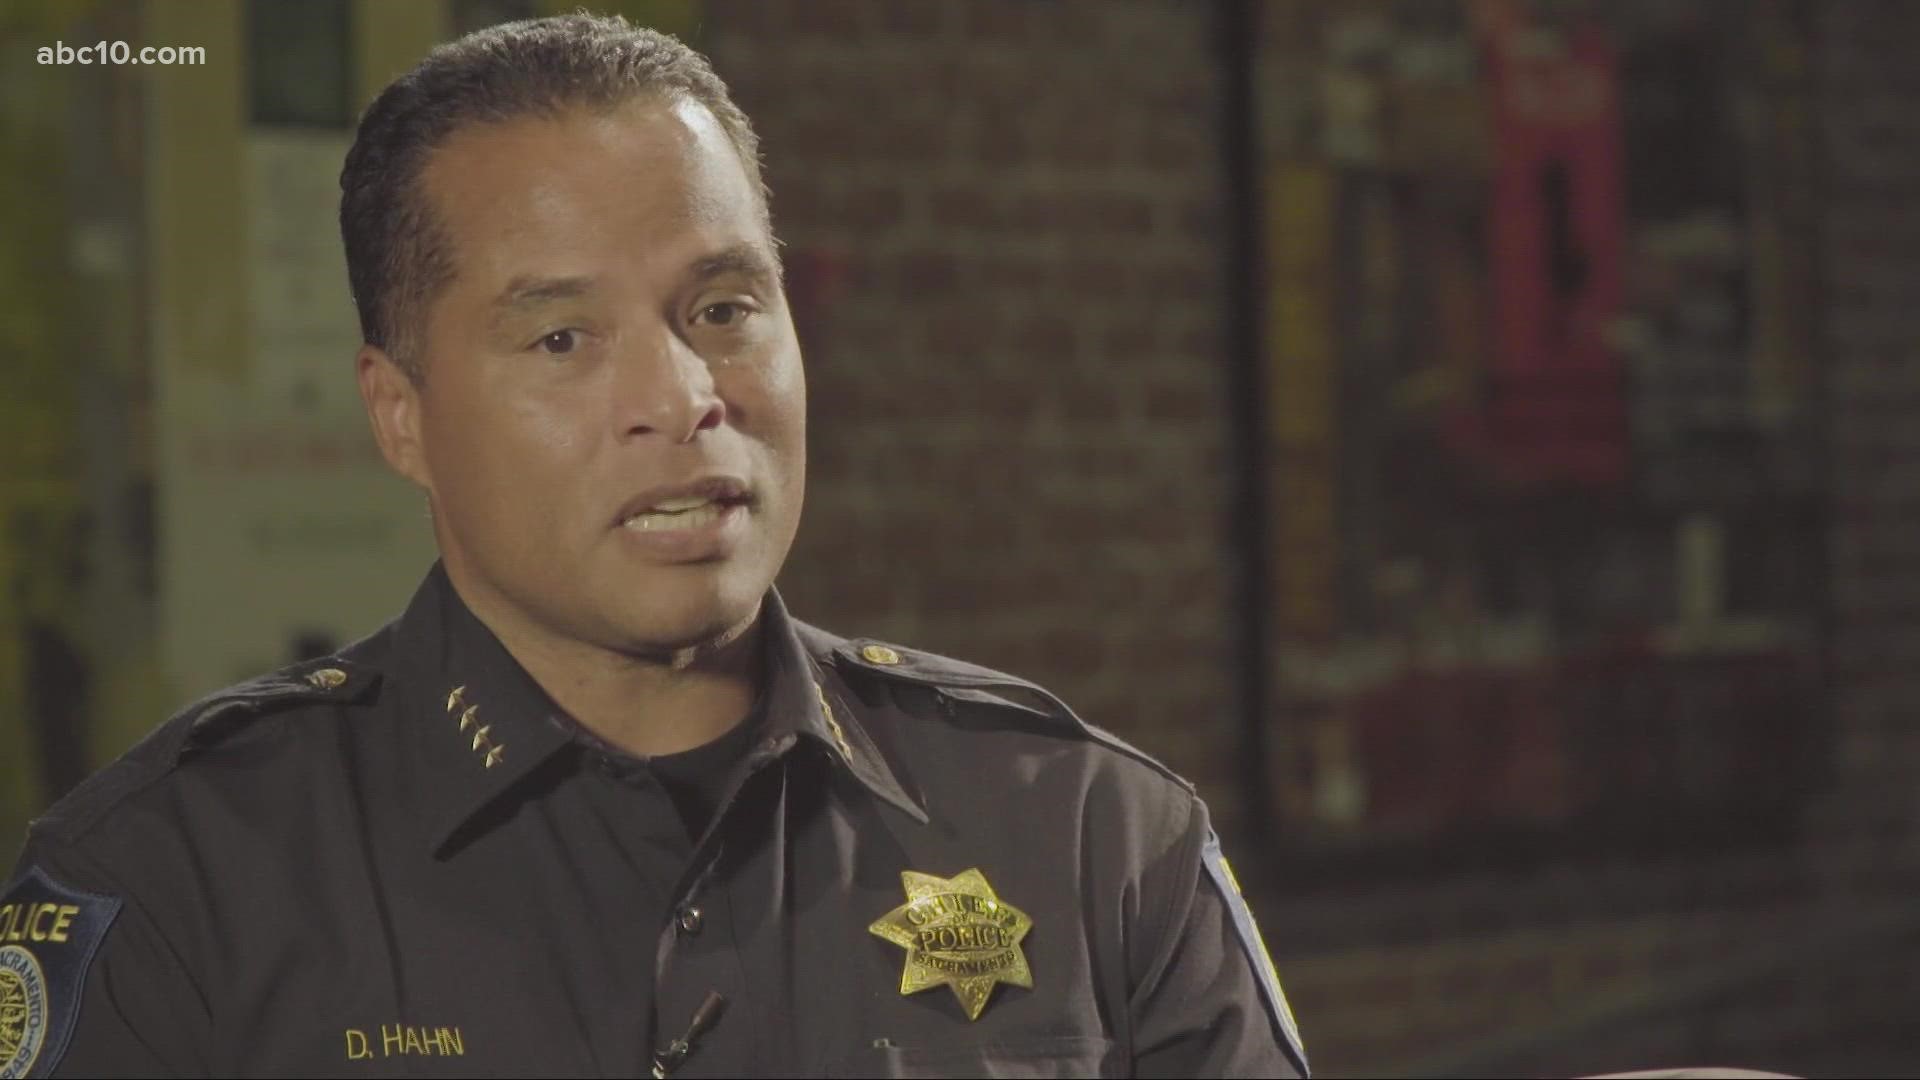 Sacramento Police Chief Daniel Hahn shared with ABC10 how he rose through the ranks over his 26 years in law enforcement.